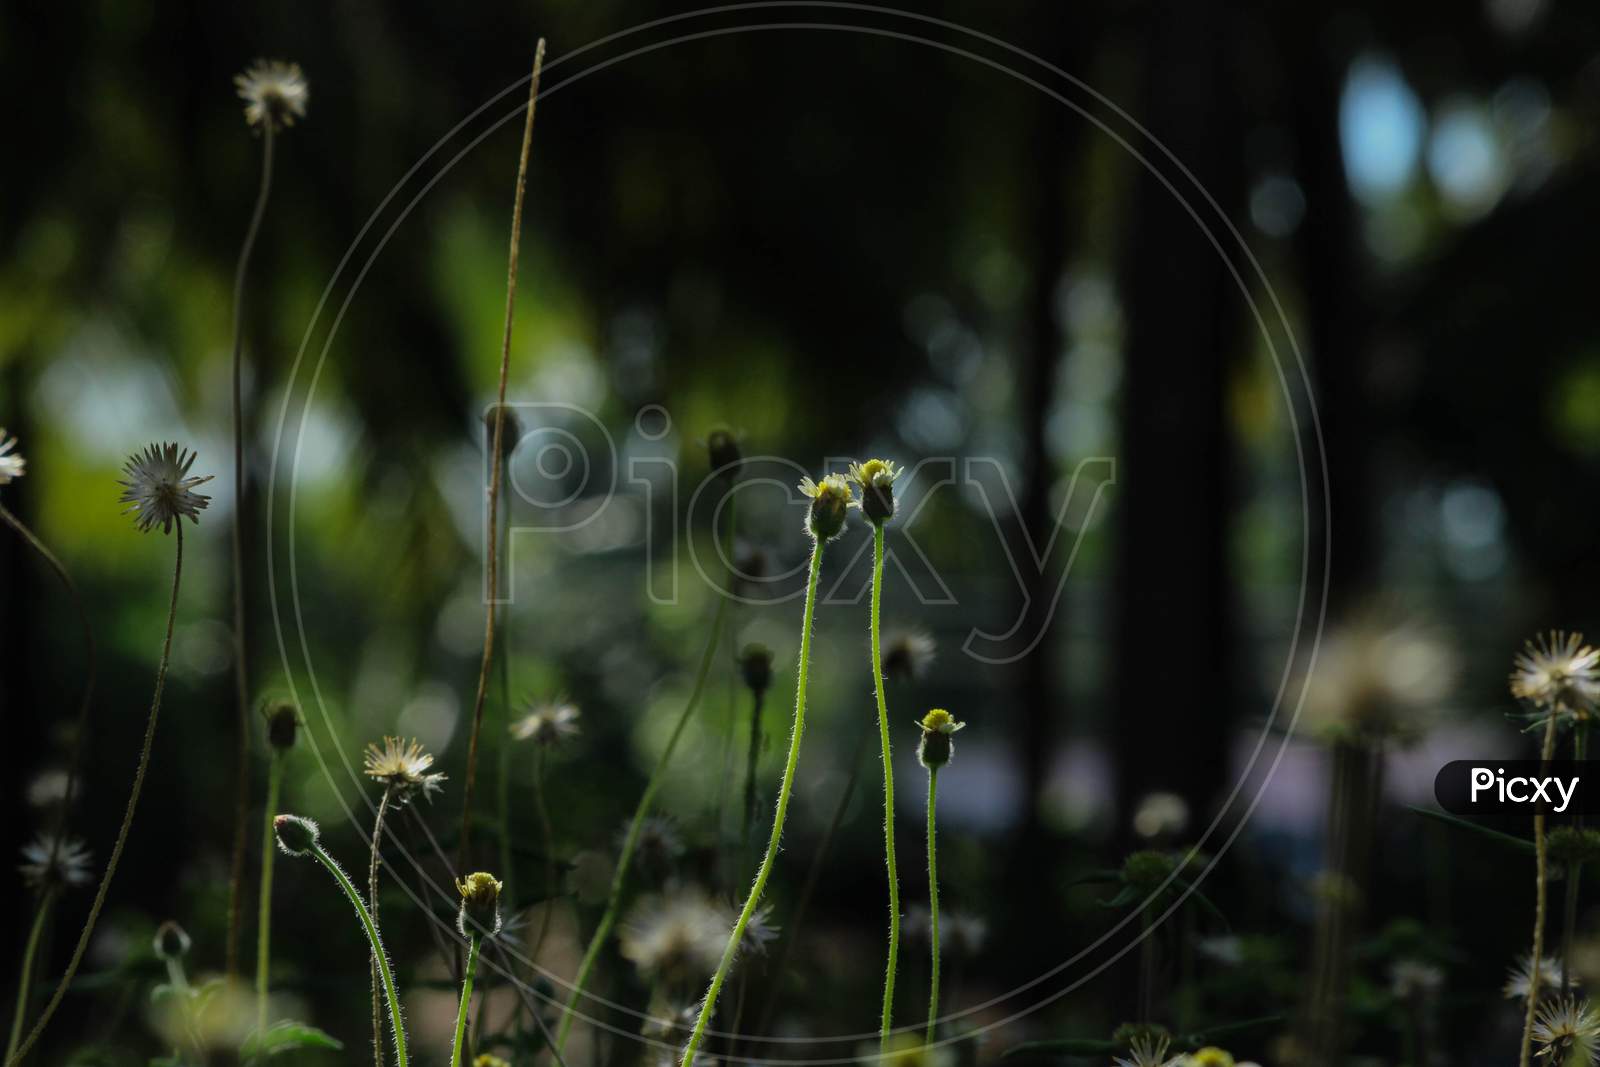 A Beautiful Tridax Daisy Or Coat Buttons Isolated Flower Field With Green Leaves With Blur Nature Background